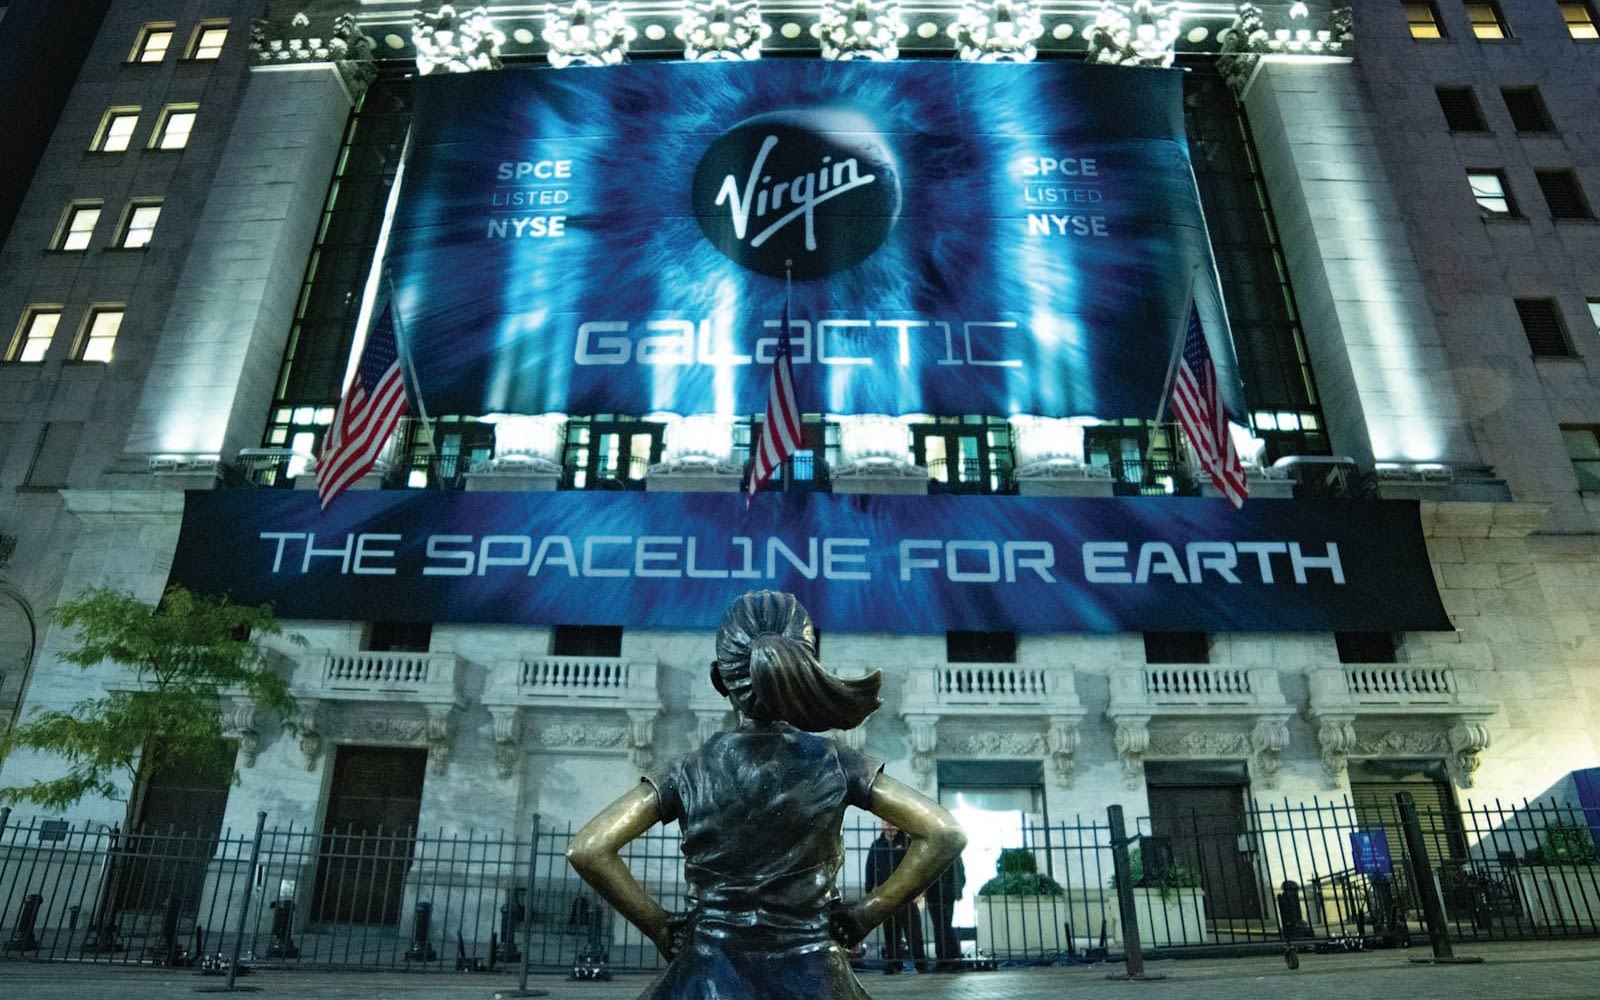 Virgin Galactic signs outside the New York Stock Exchange